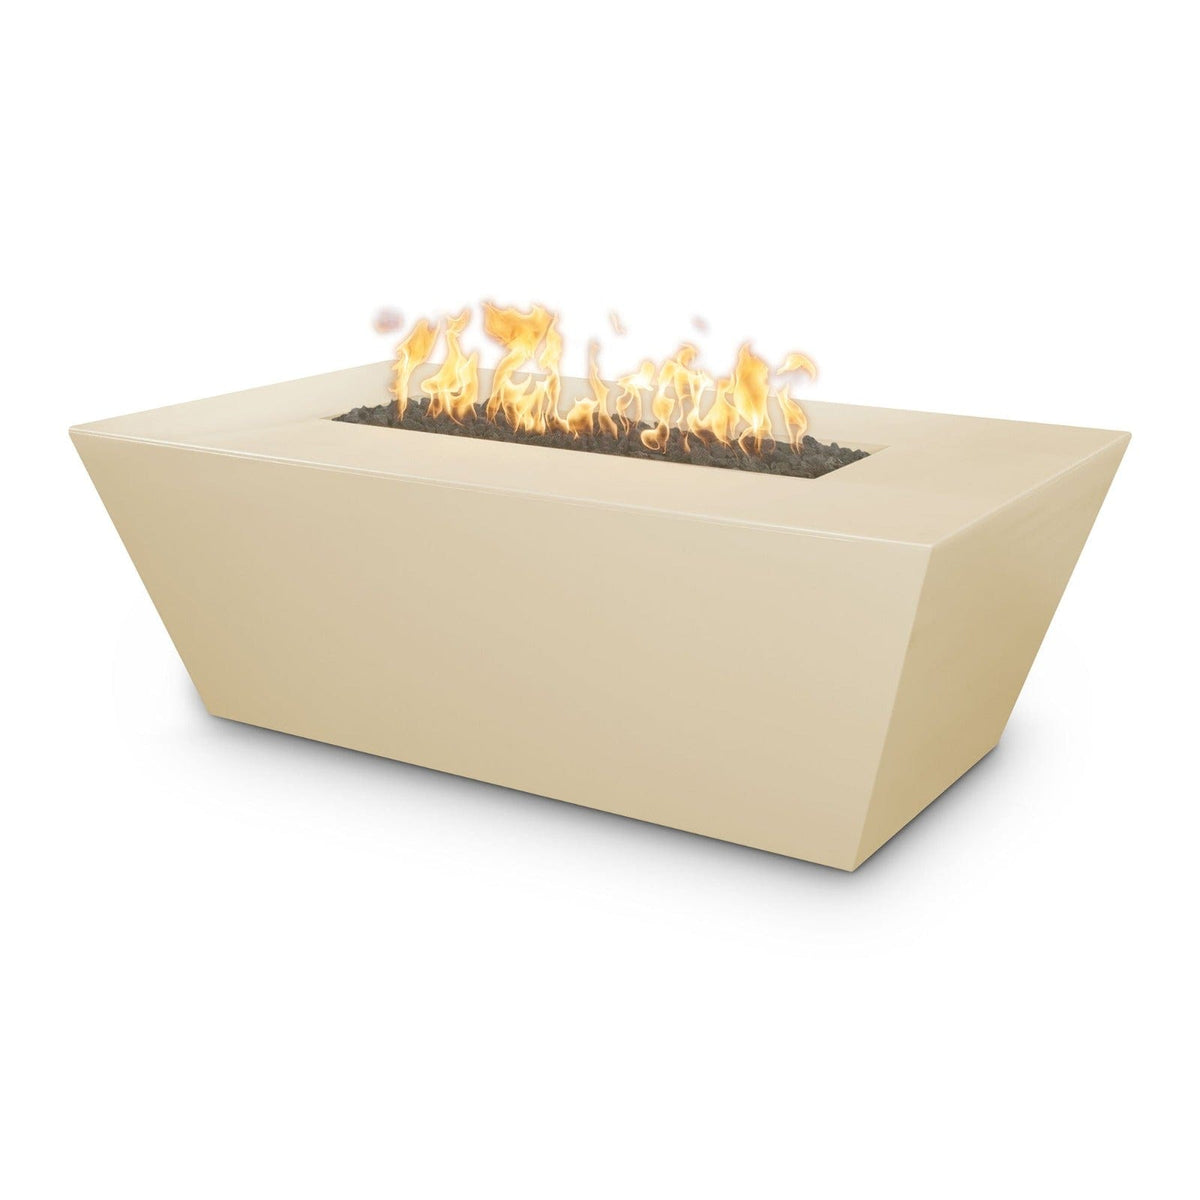 The Outdoor Plus Fire Features Vanilla (-VAN) / Match Lit Ignition / Liquid Propane The Outdoor Plus 60&quot; Rectangular Angelus Fire Pit in Solid Concrete Finishes - GFRC Concrete / OPT-AGLGF60, OPT-AGLGF60FSML, OPT-AGLGF60FSEN, OPT-AGLGF60E12V, OPT-AGLGF60EKIT